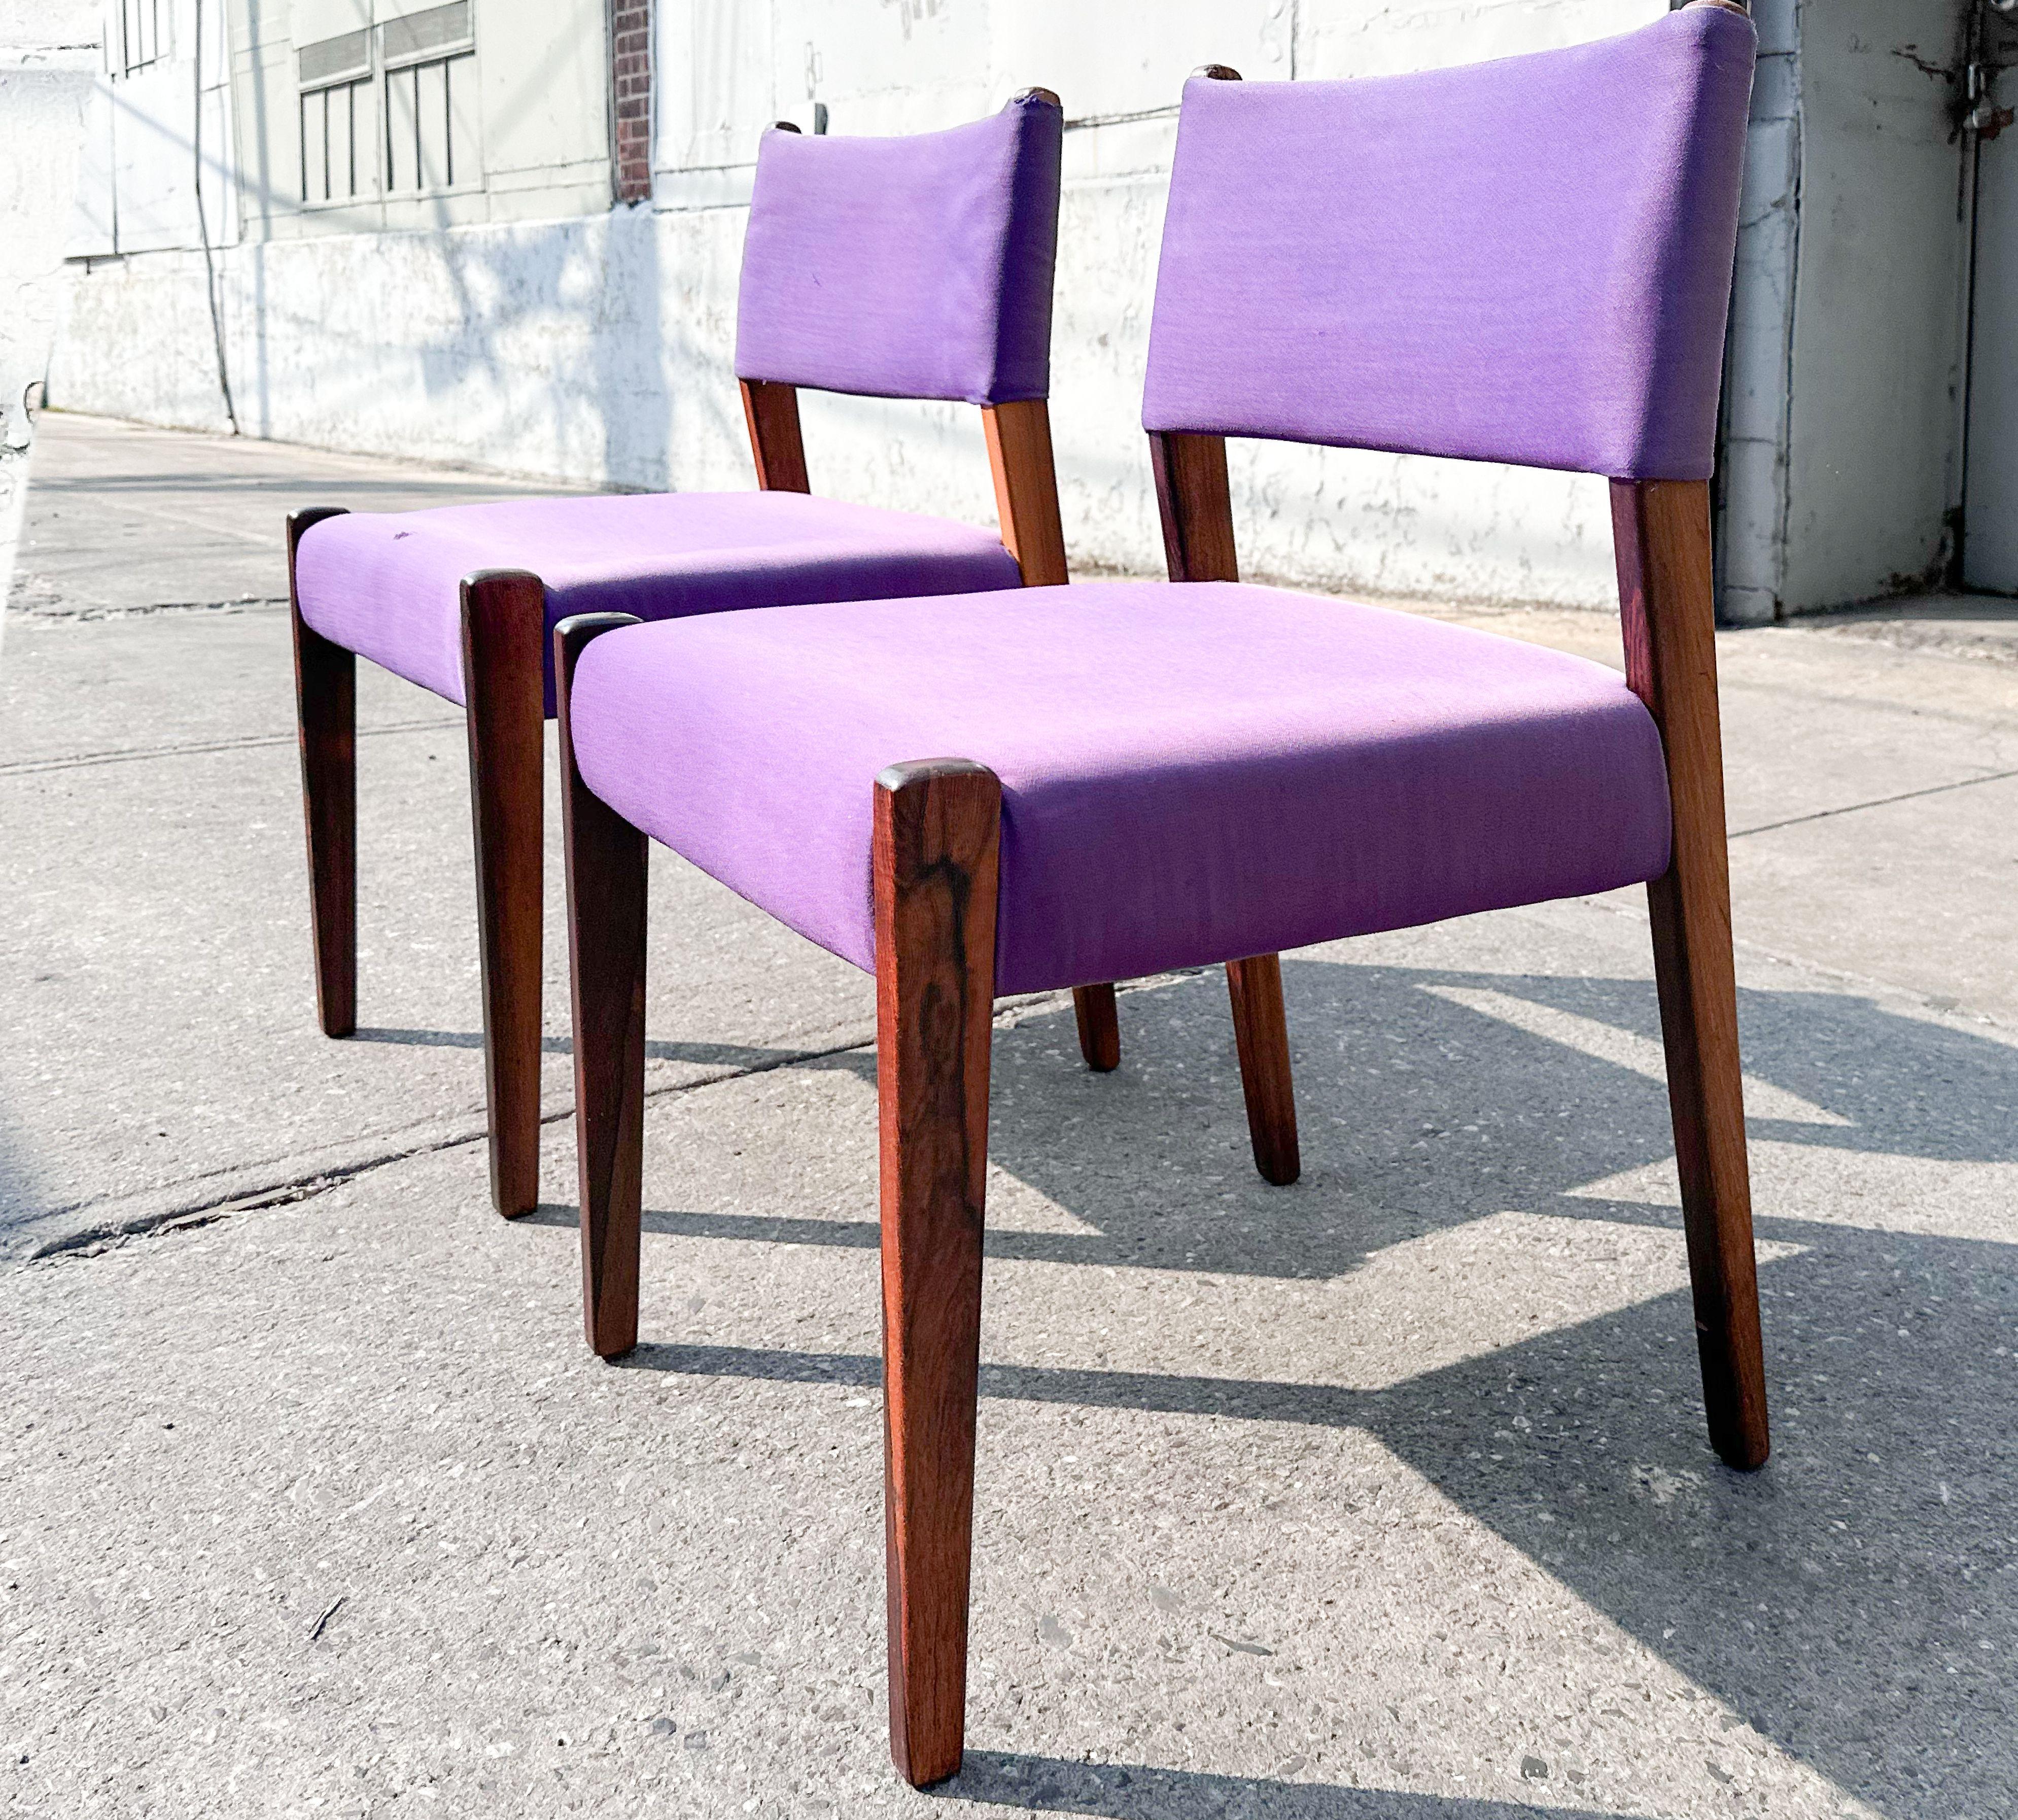 Sergio Rodrigues for Oca, Jacarandá Dining Chair Set of 4, Brasil, 1950s. Exceedingly rare set of 4. Appear to be all original. Original textile is faded and has some wear. Each chair with original label. Brazilian Rosewood (Jacaranda). Museum